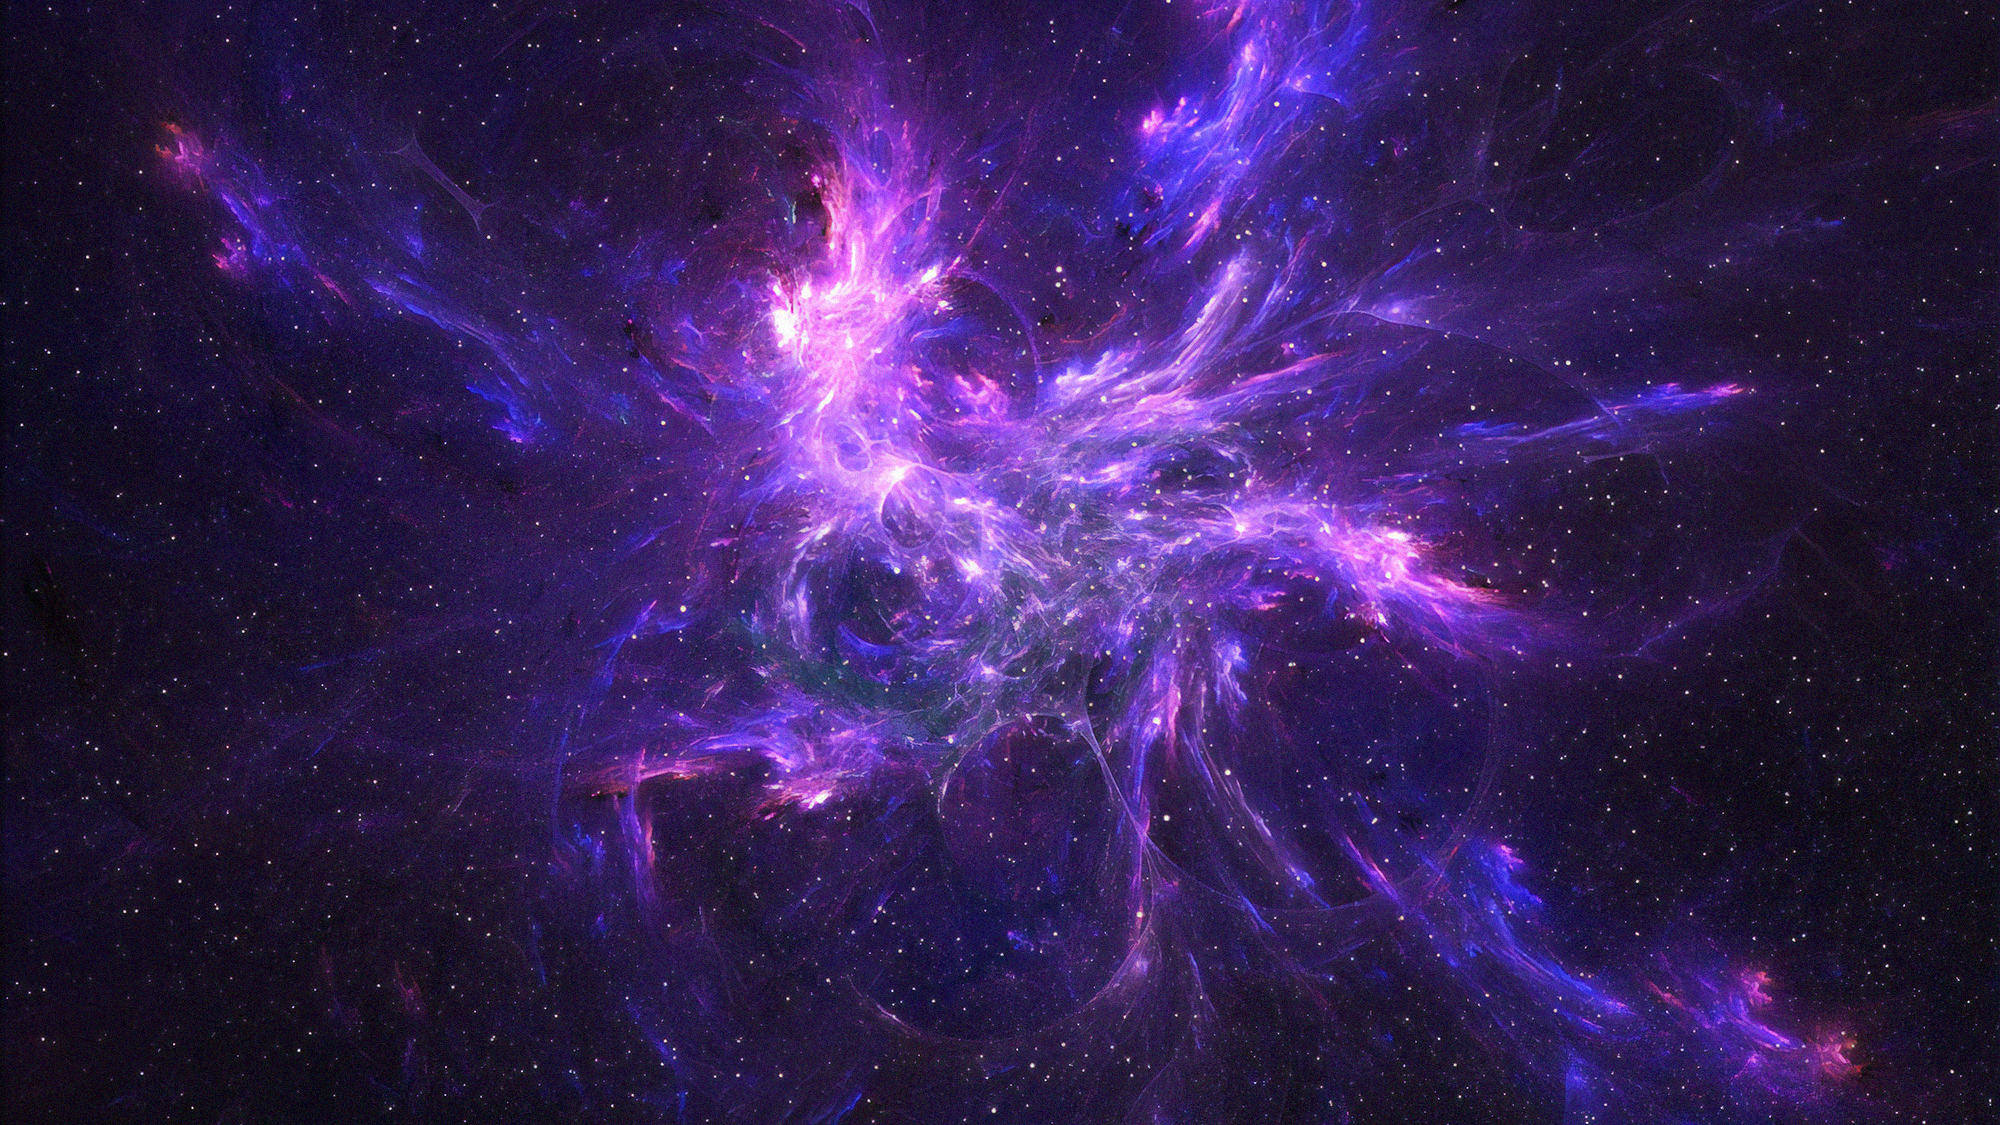 The Nebula IPhone Wallpaper HD  IPhone Wallpapers  iPhone Wallpapers